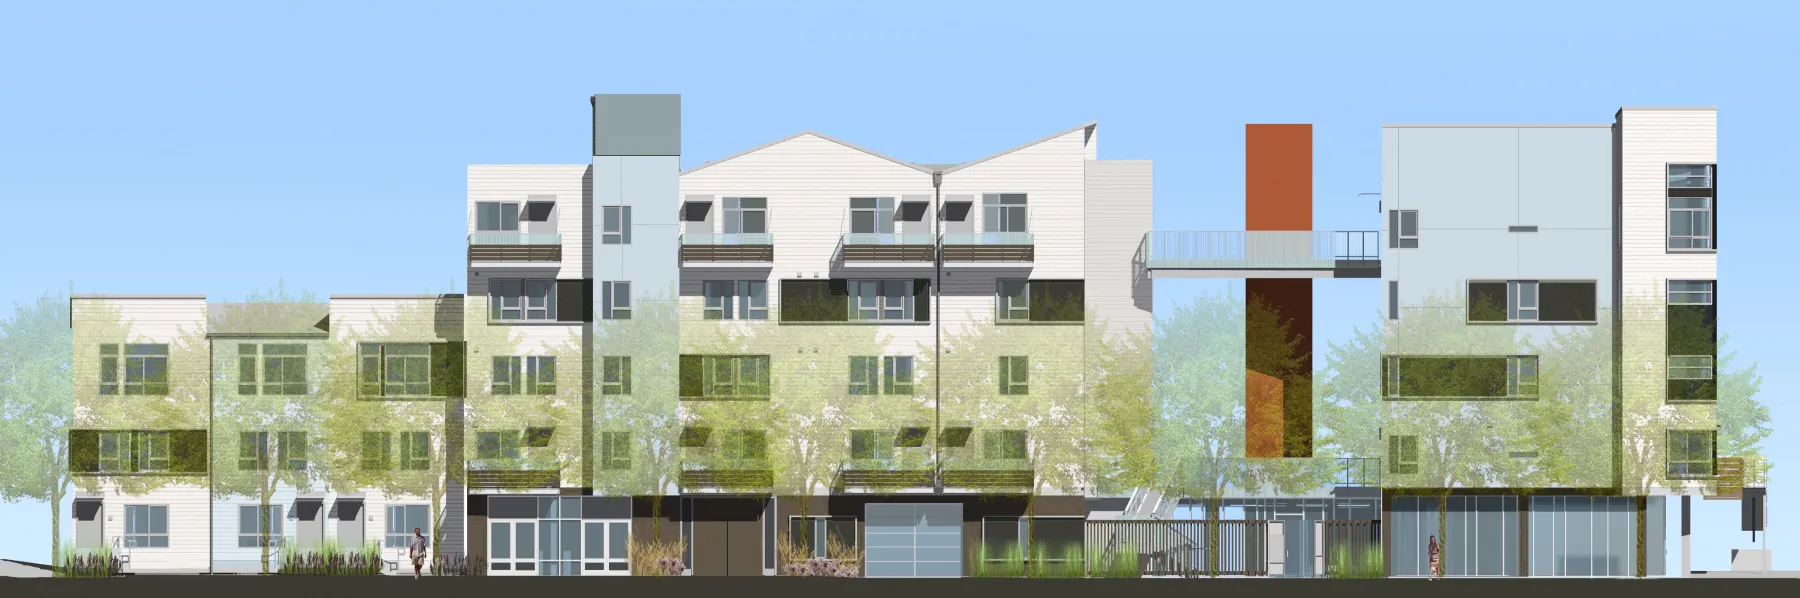 Rendering of elevation with townhouses at Bancroft Avenue for Armstrong Place in San Francisco.